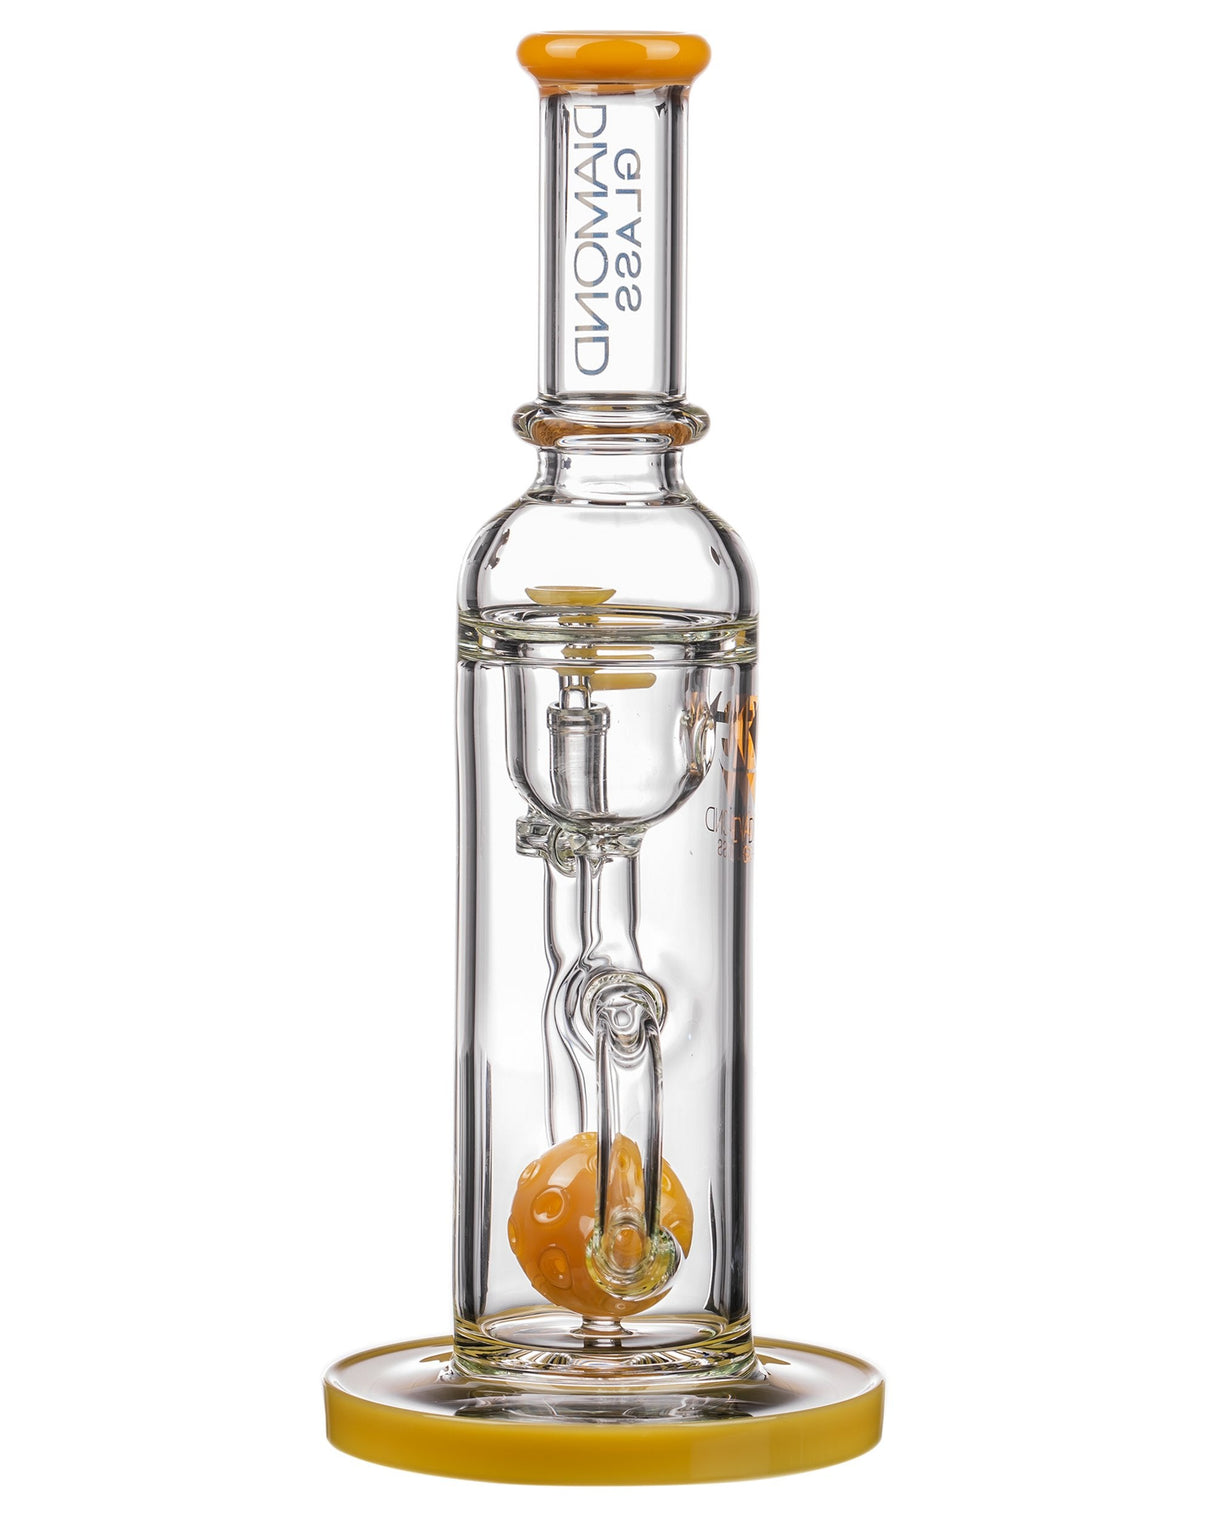 Diamond Glass Ball Perc Incycler Dab Rig with clear and blue accents, front view on white background